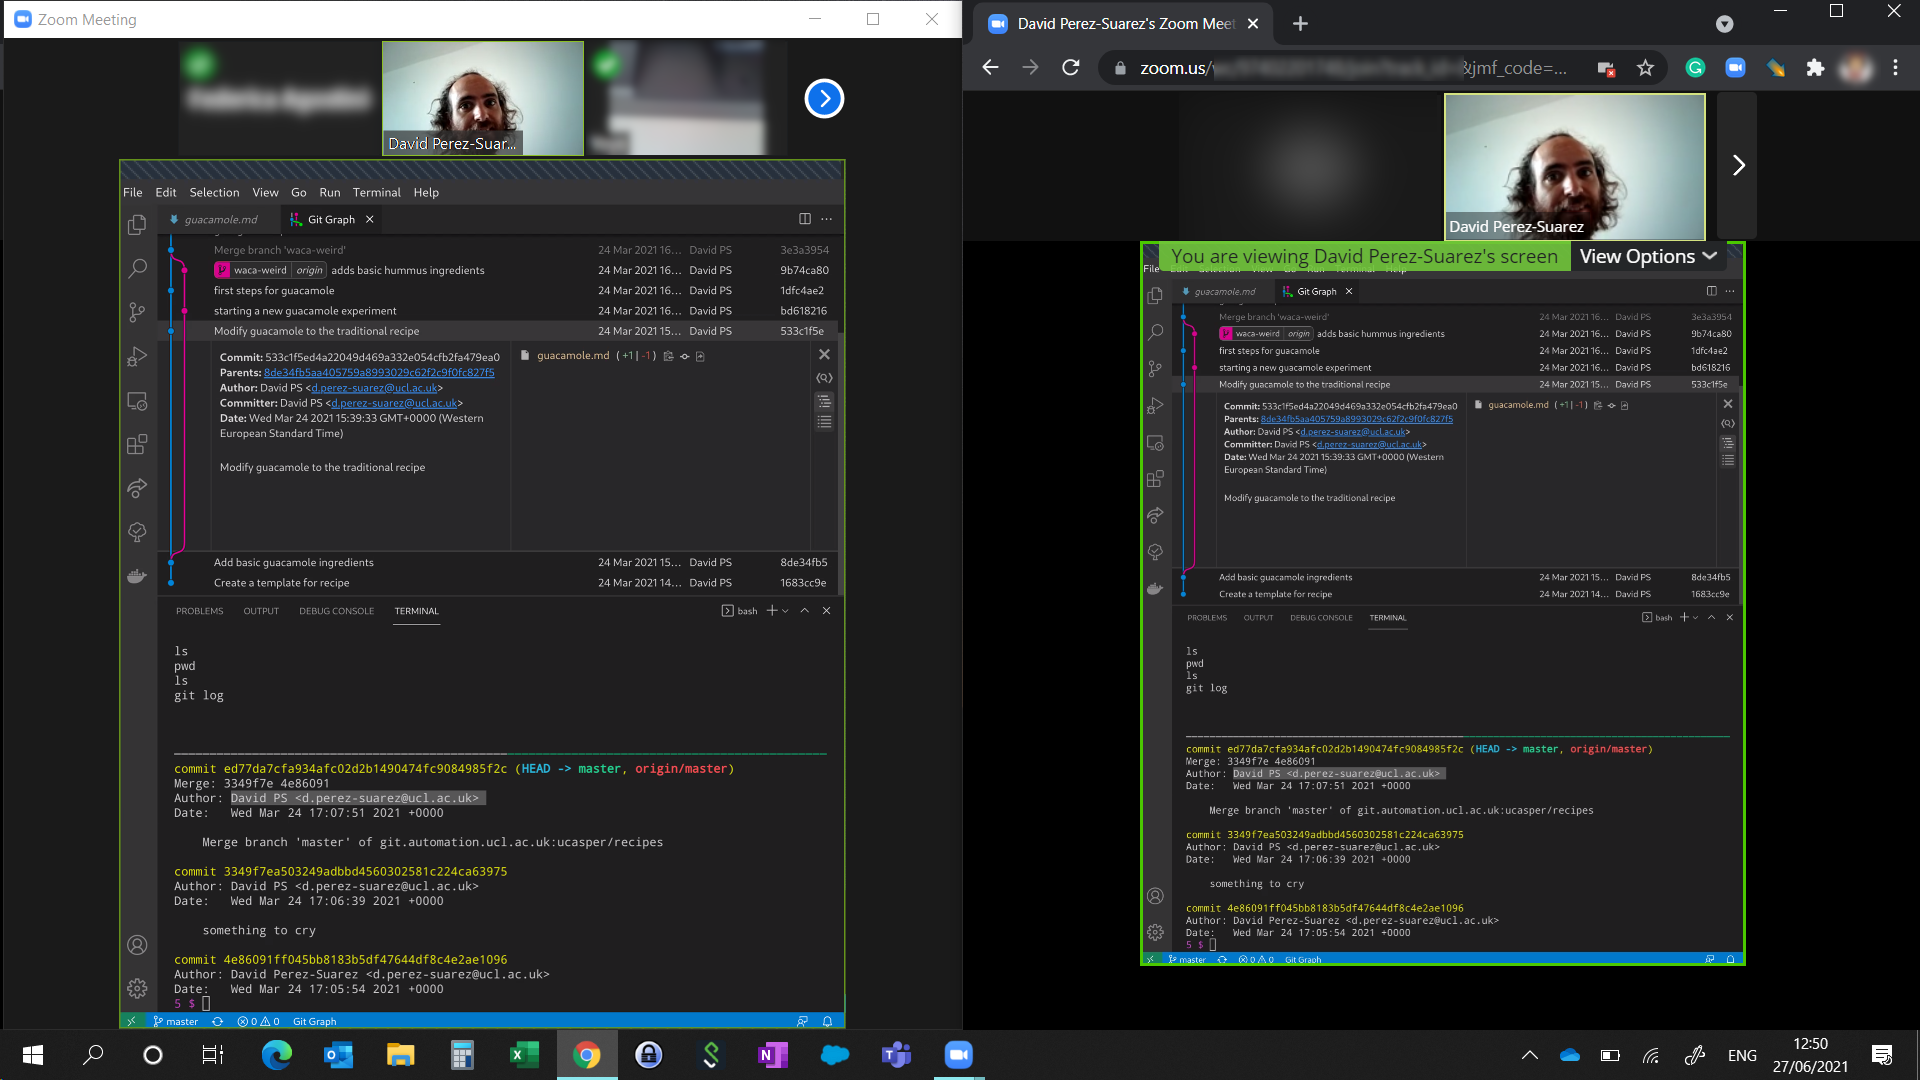 Connecting from Windows, desktop application on the left vs Chrome on the right